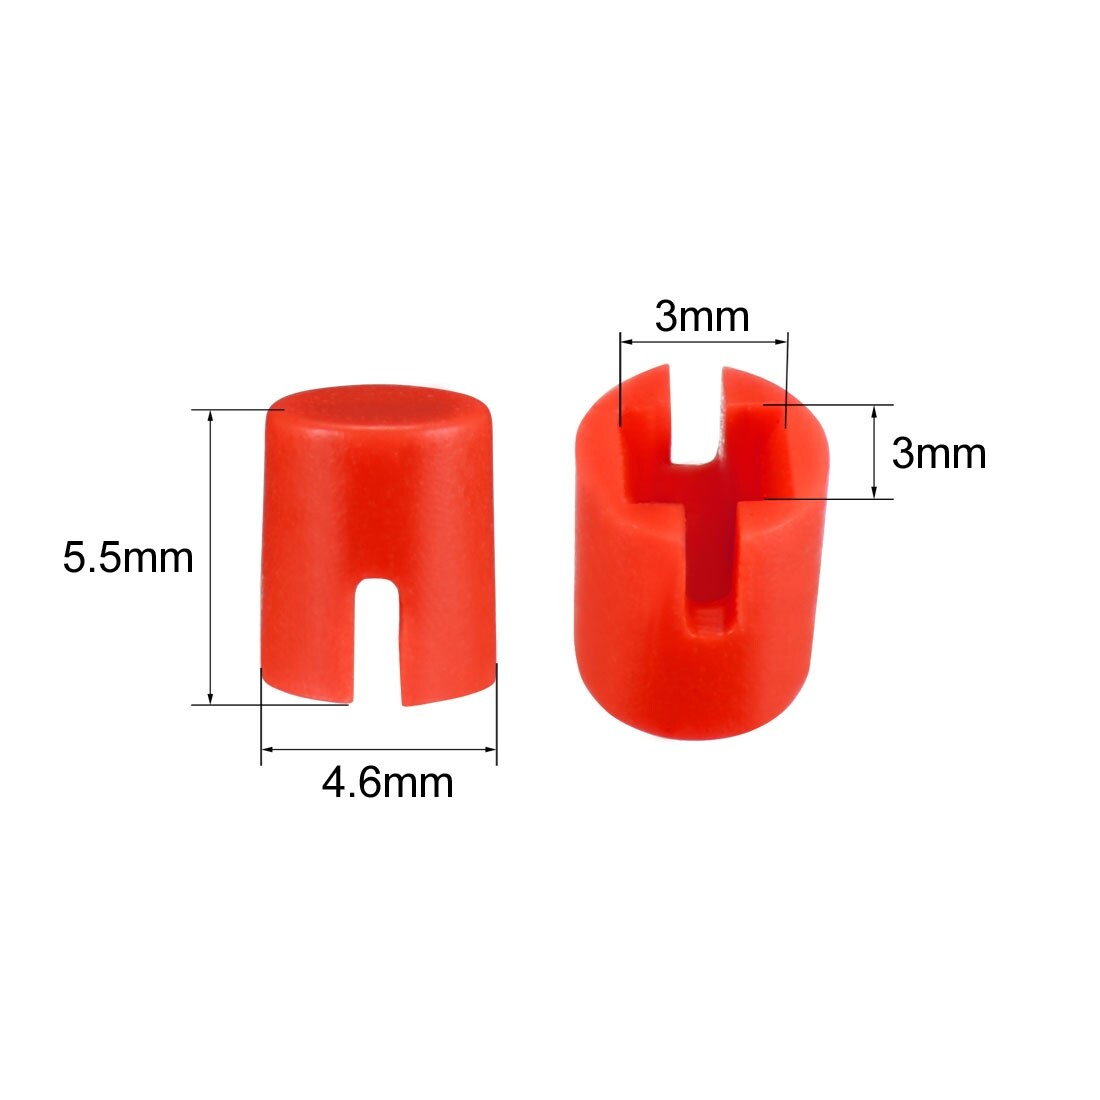 50Pcs 4.6x5.5mm Pushbutton Switch Caps Cover for 6x6x7.3mm Tact Switch - Red